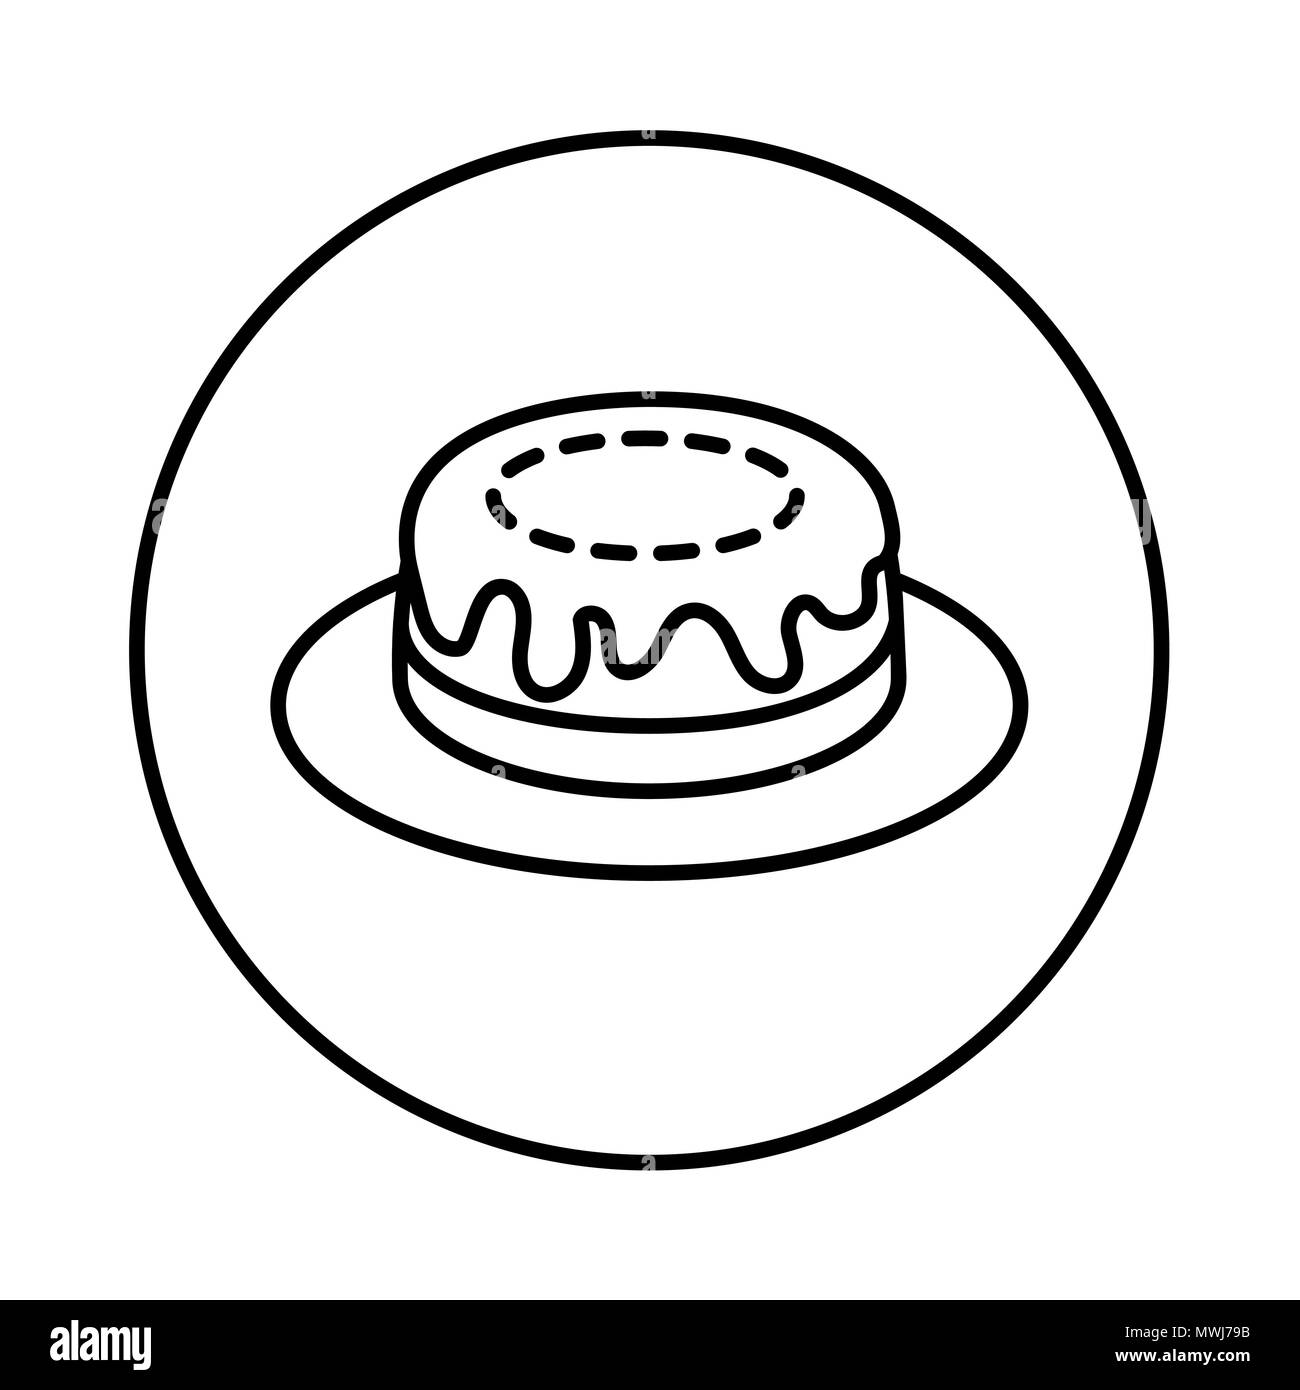 Vector of Cake icon in Circle line, iconic symbol inside a circle, on white background. Vector Iconic Design. Stock Vector